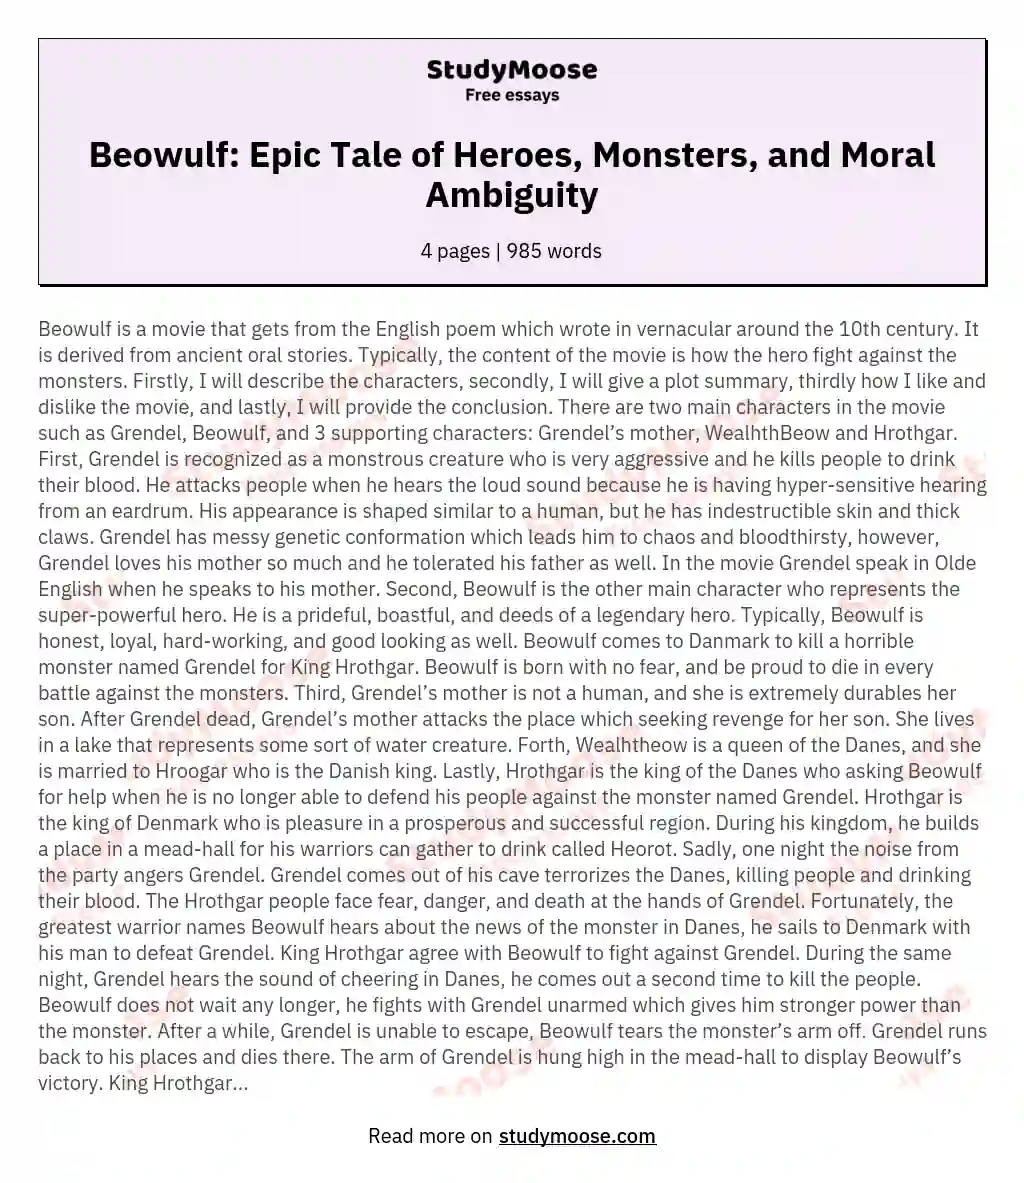 Beowulf: Epic Tale of Heroes, Monsters, and Moral Ambiguity essay